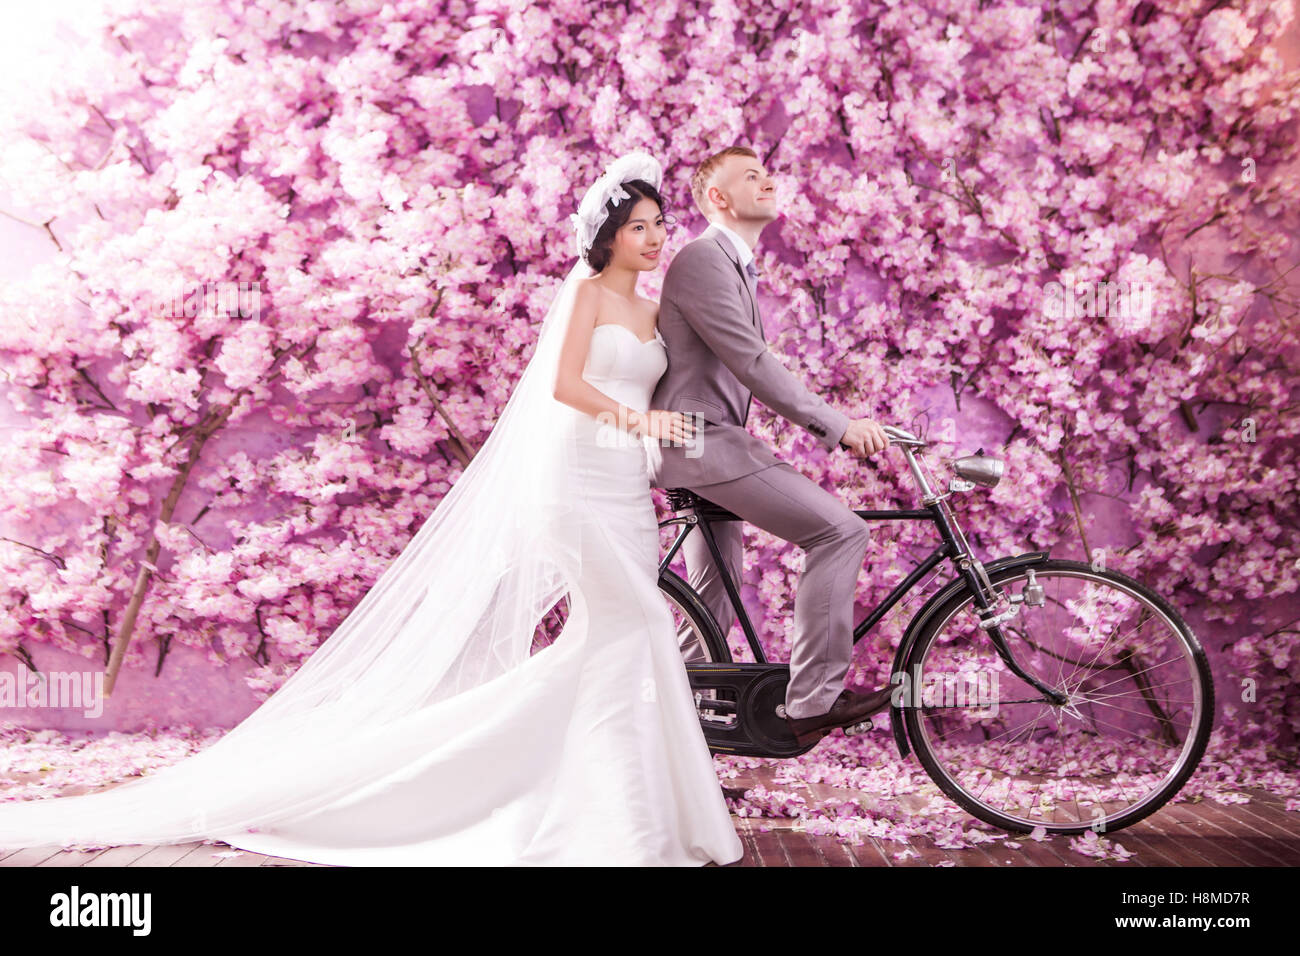 Thoughtful bride standing with bridegroom riding bicycle against pink flowers covering wall Stock Photo